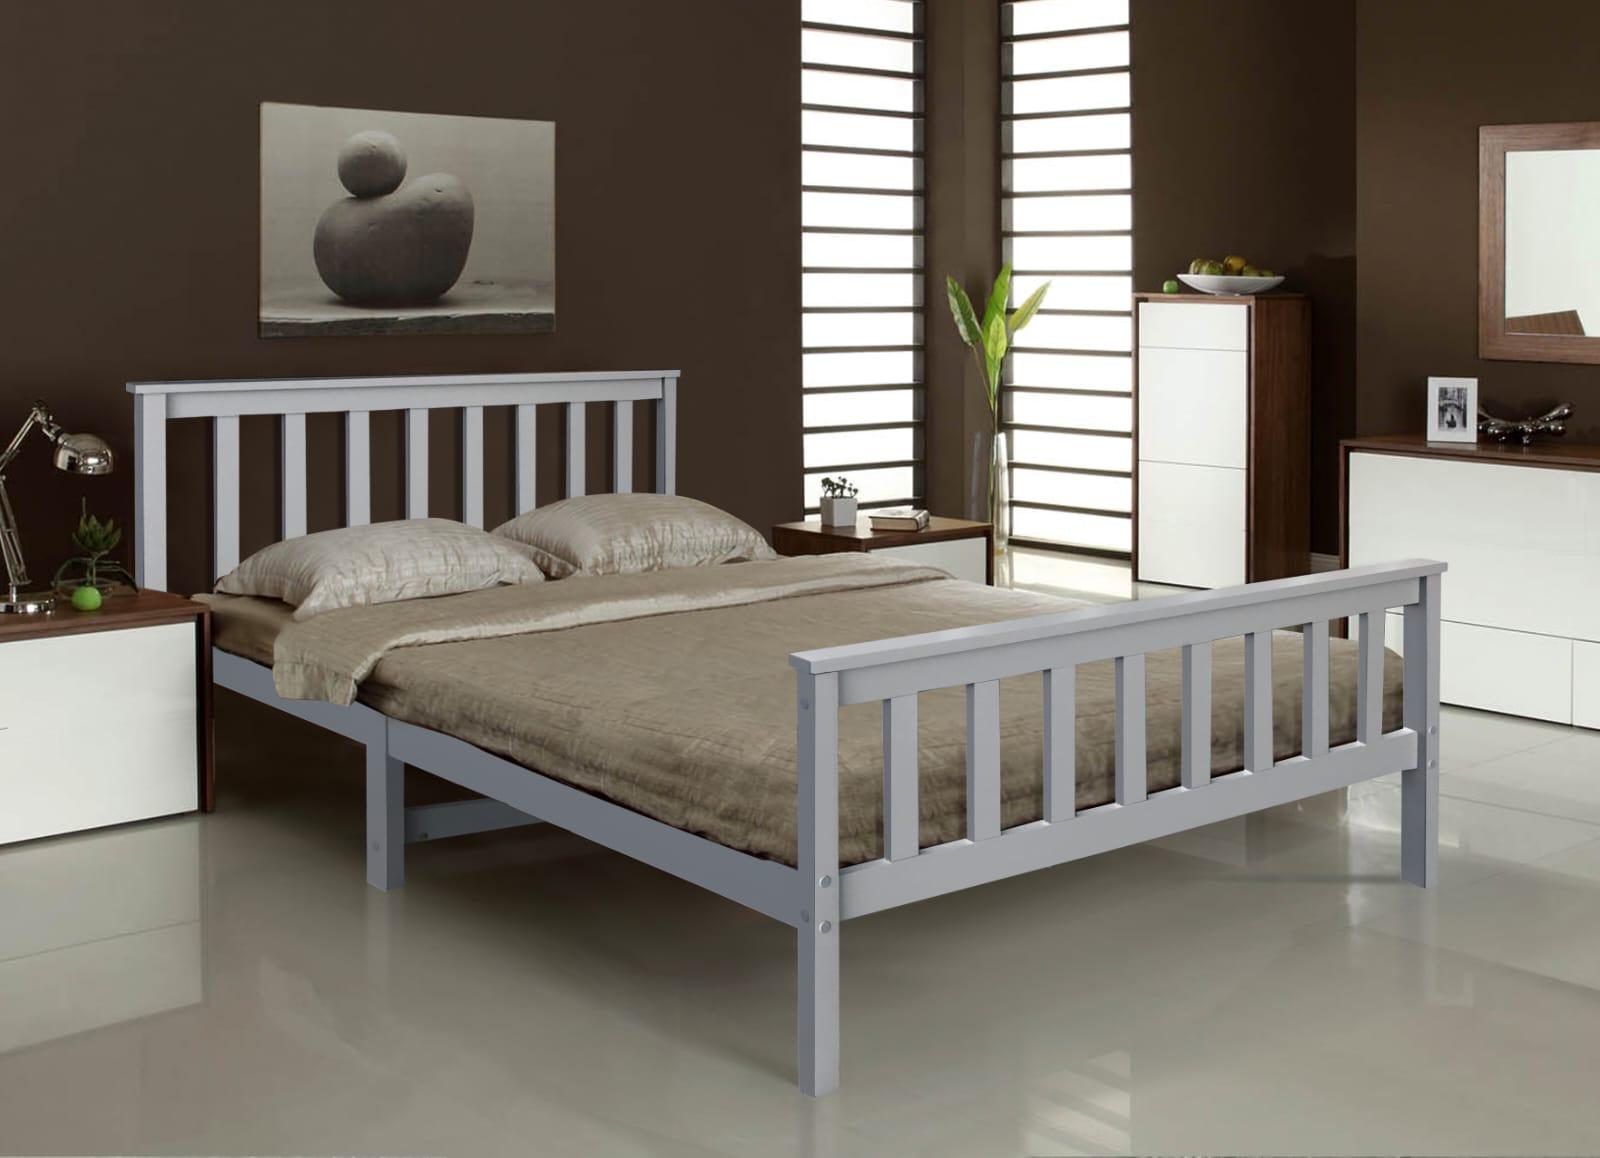 memory foam mattress and bed frame